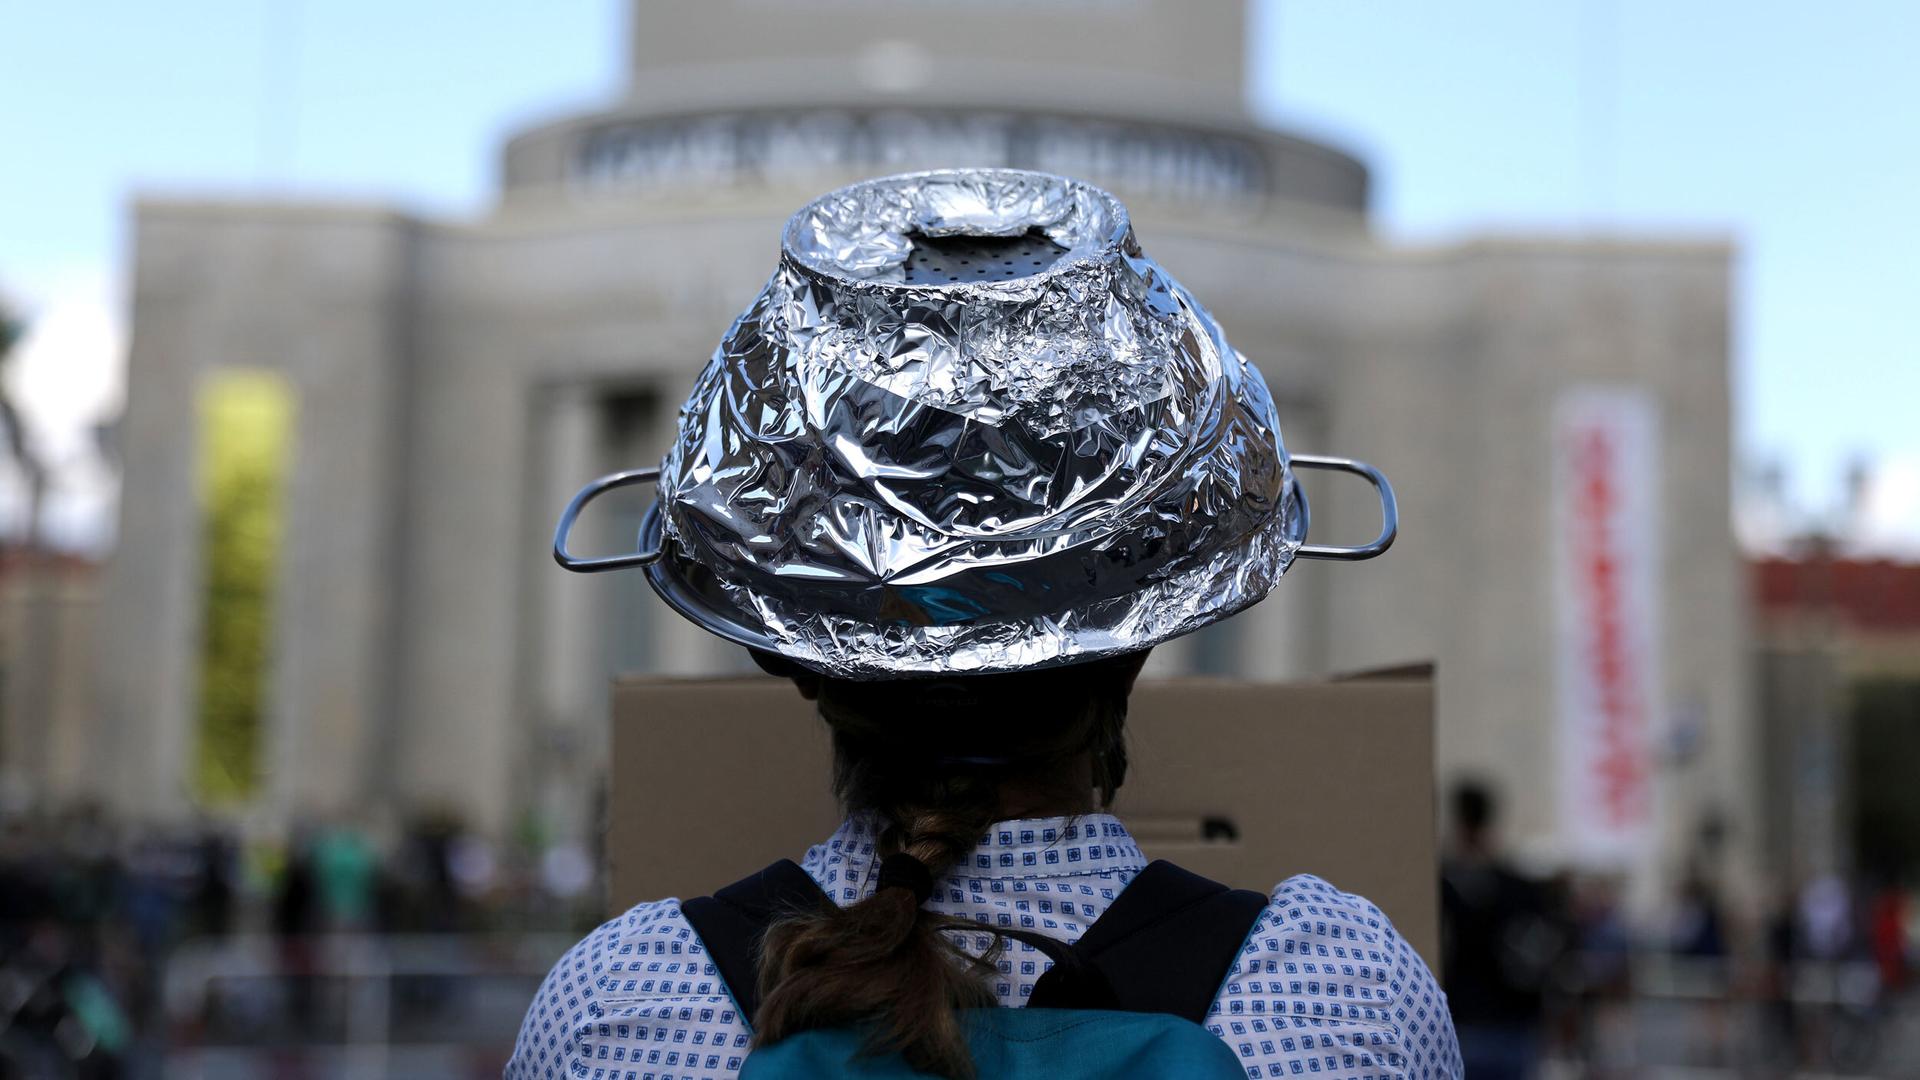 A woman is shown in a photograph from behind wearing a tin-foil hat.